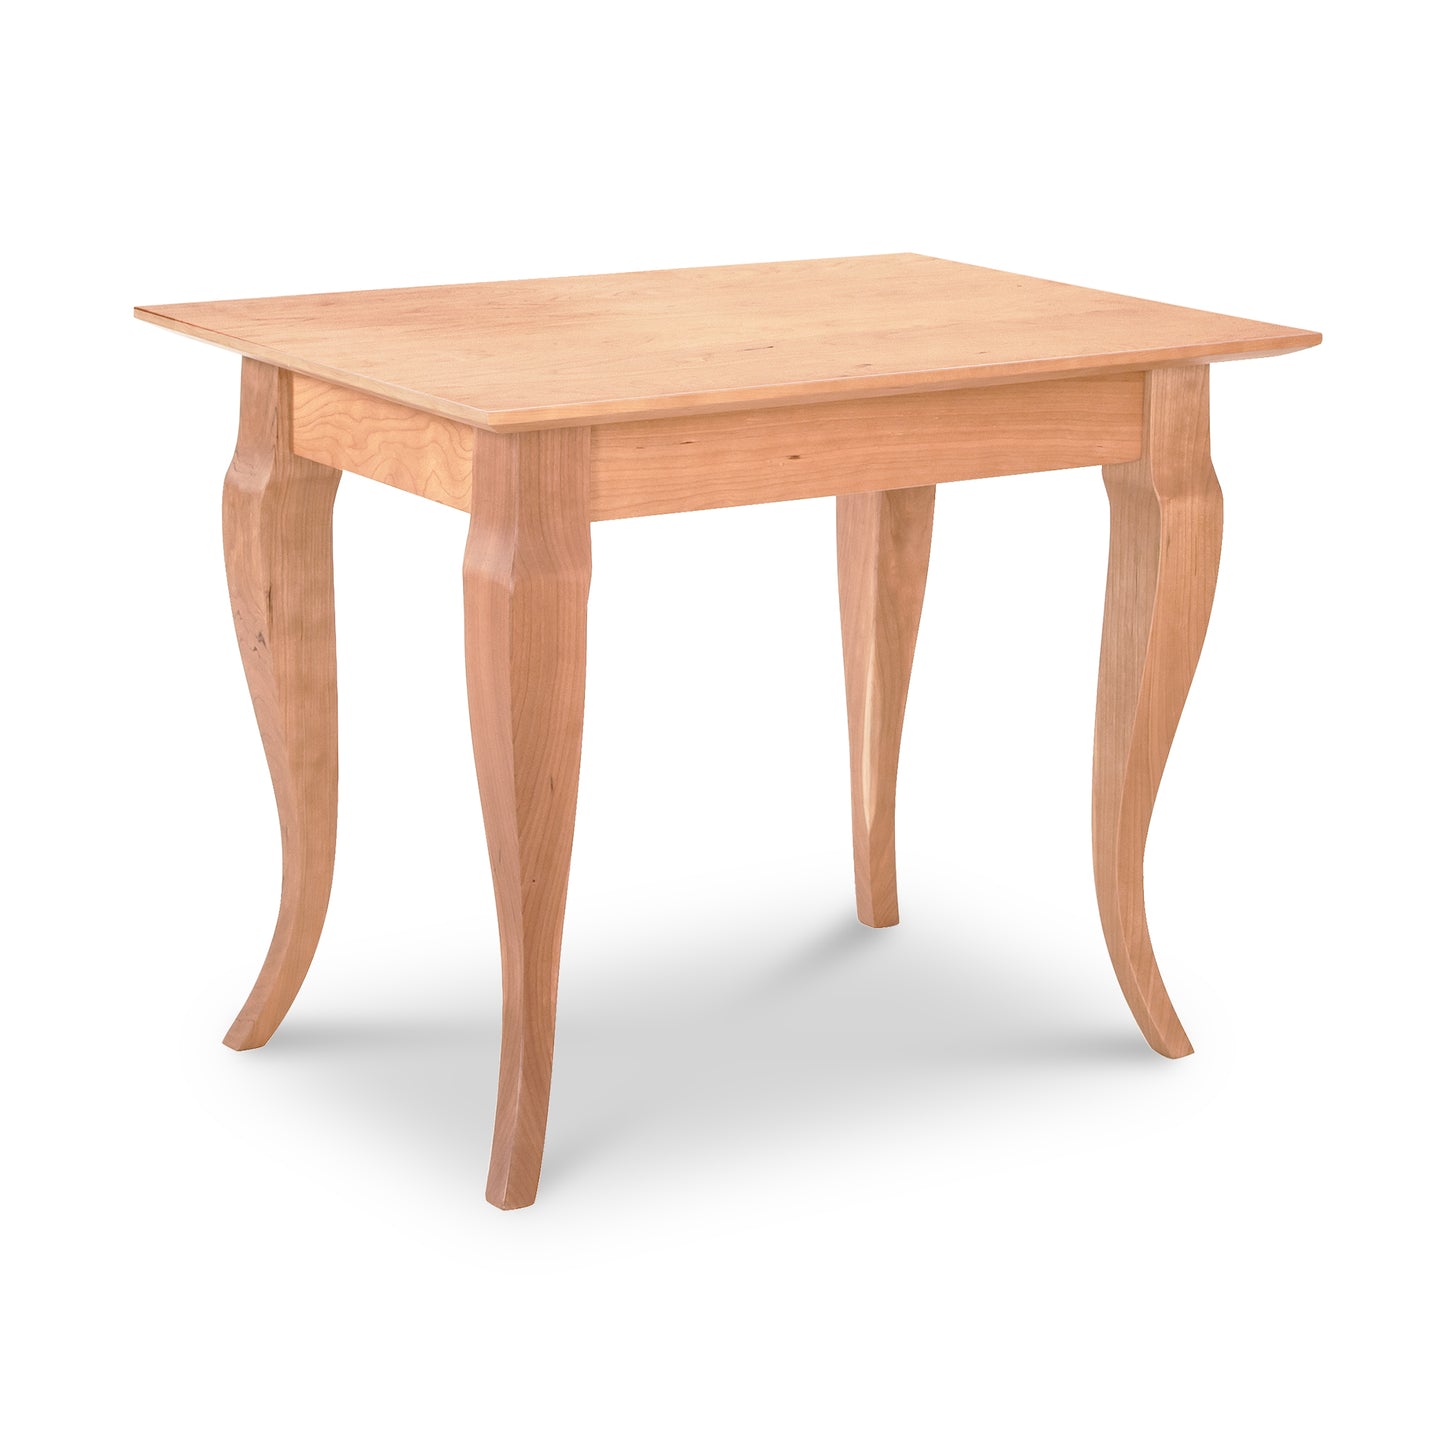 A small Lyndon Furniture French Country End Table made of solid wood, with legs, on a white background.